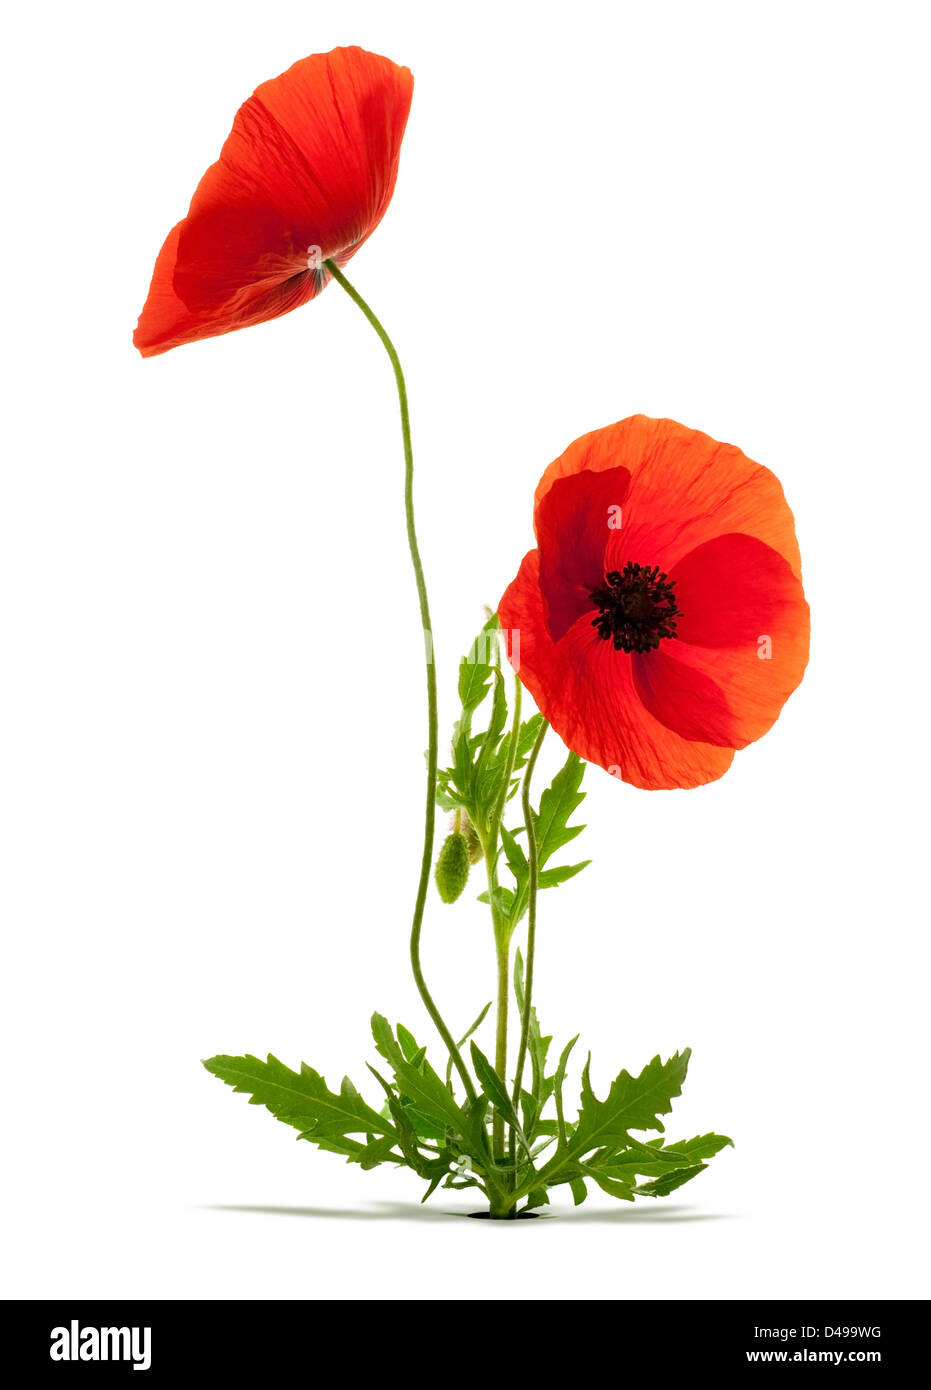 papaver rhoeas, red poppies over white background with shadow and a hole Stock Photo